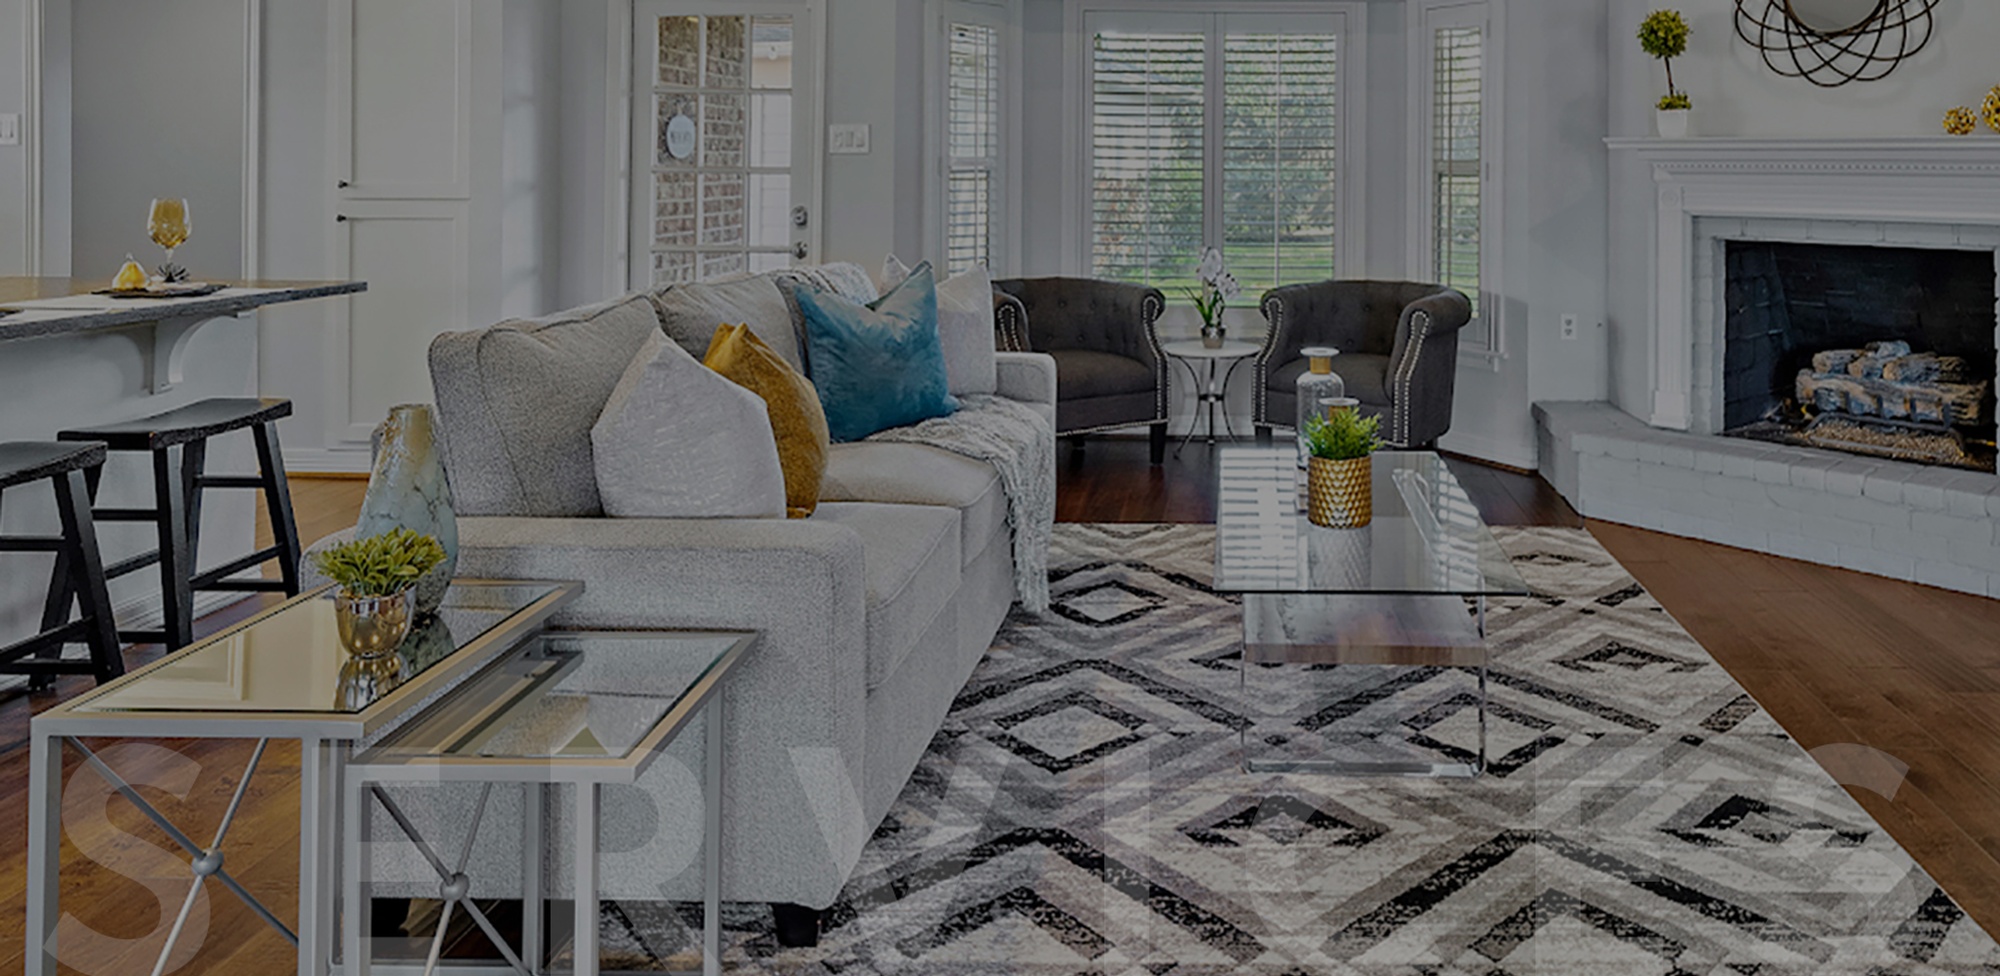 Redesign Services by Debonair Home Staging and Redesign - Home Staging Company in Pearland, TX